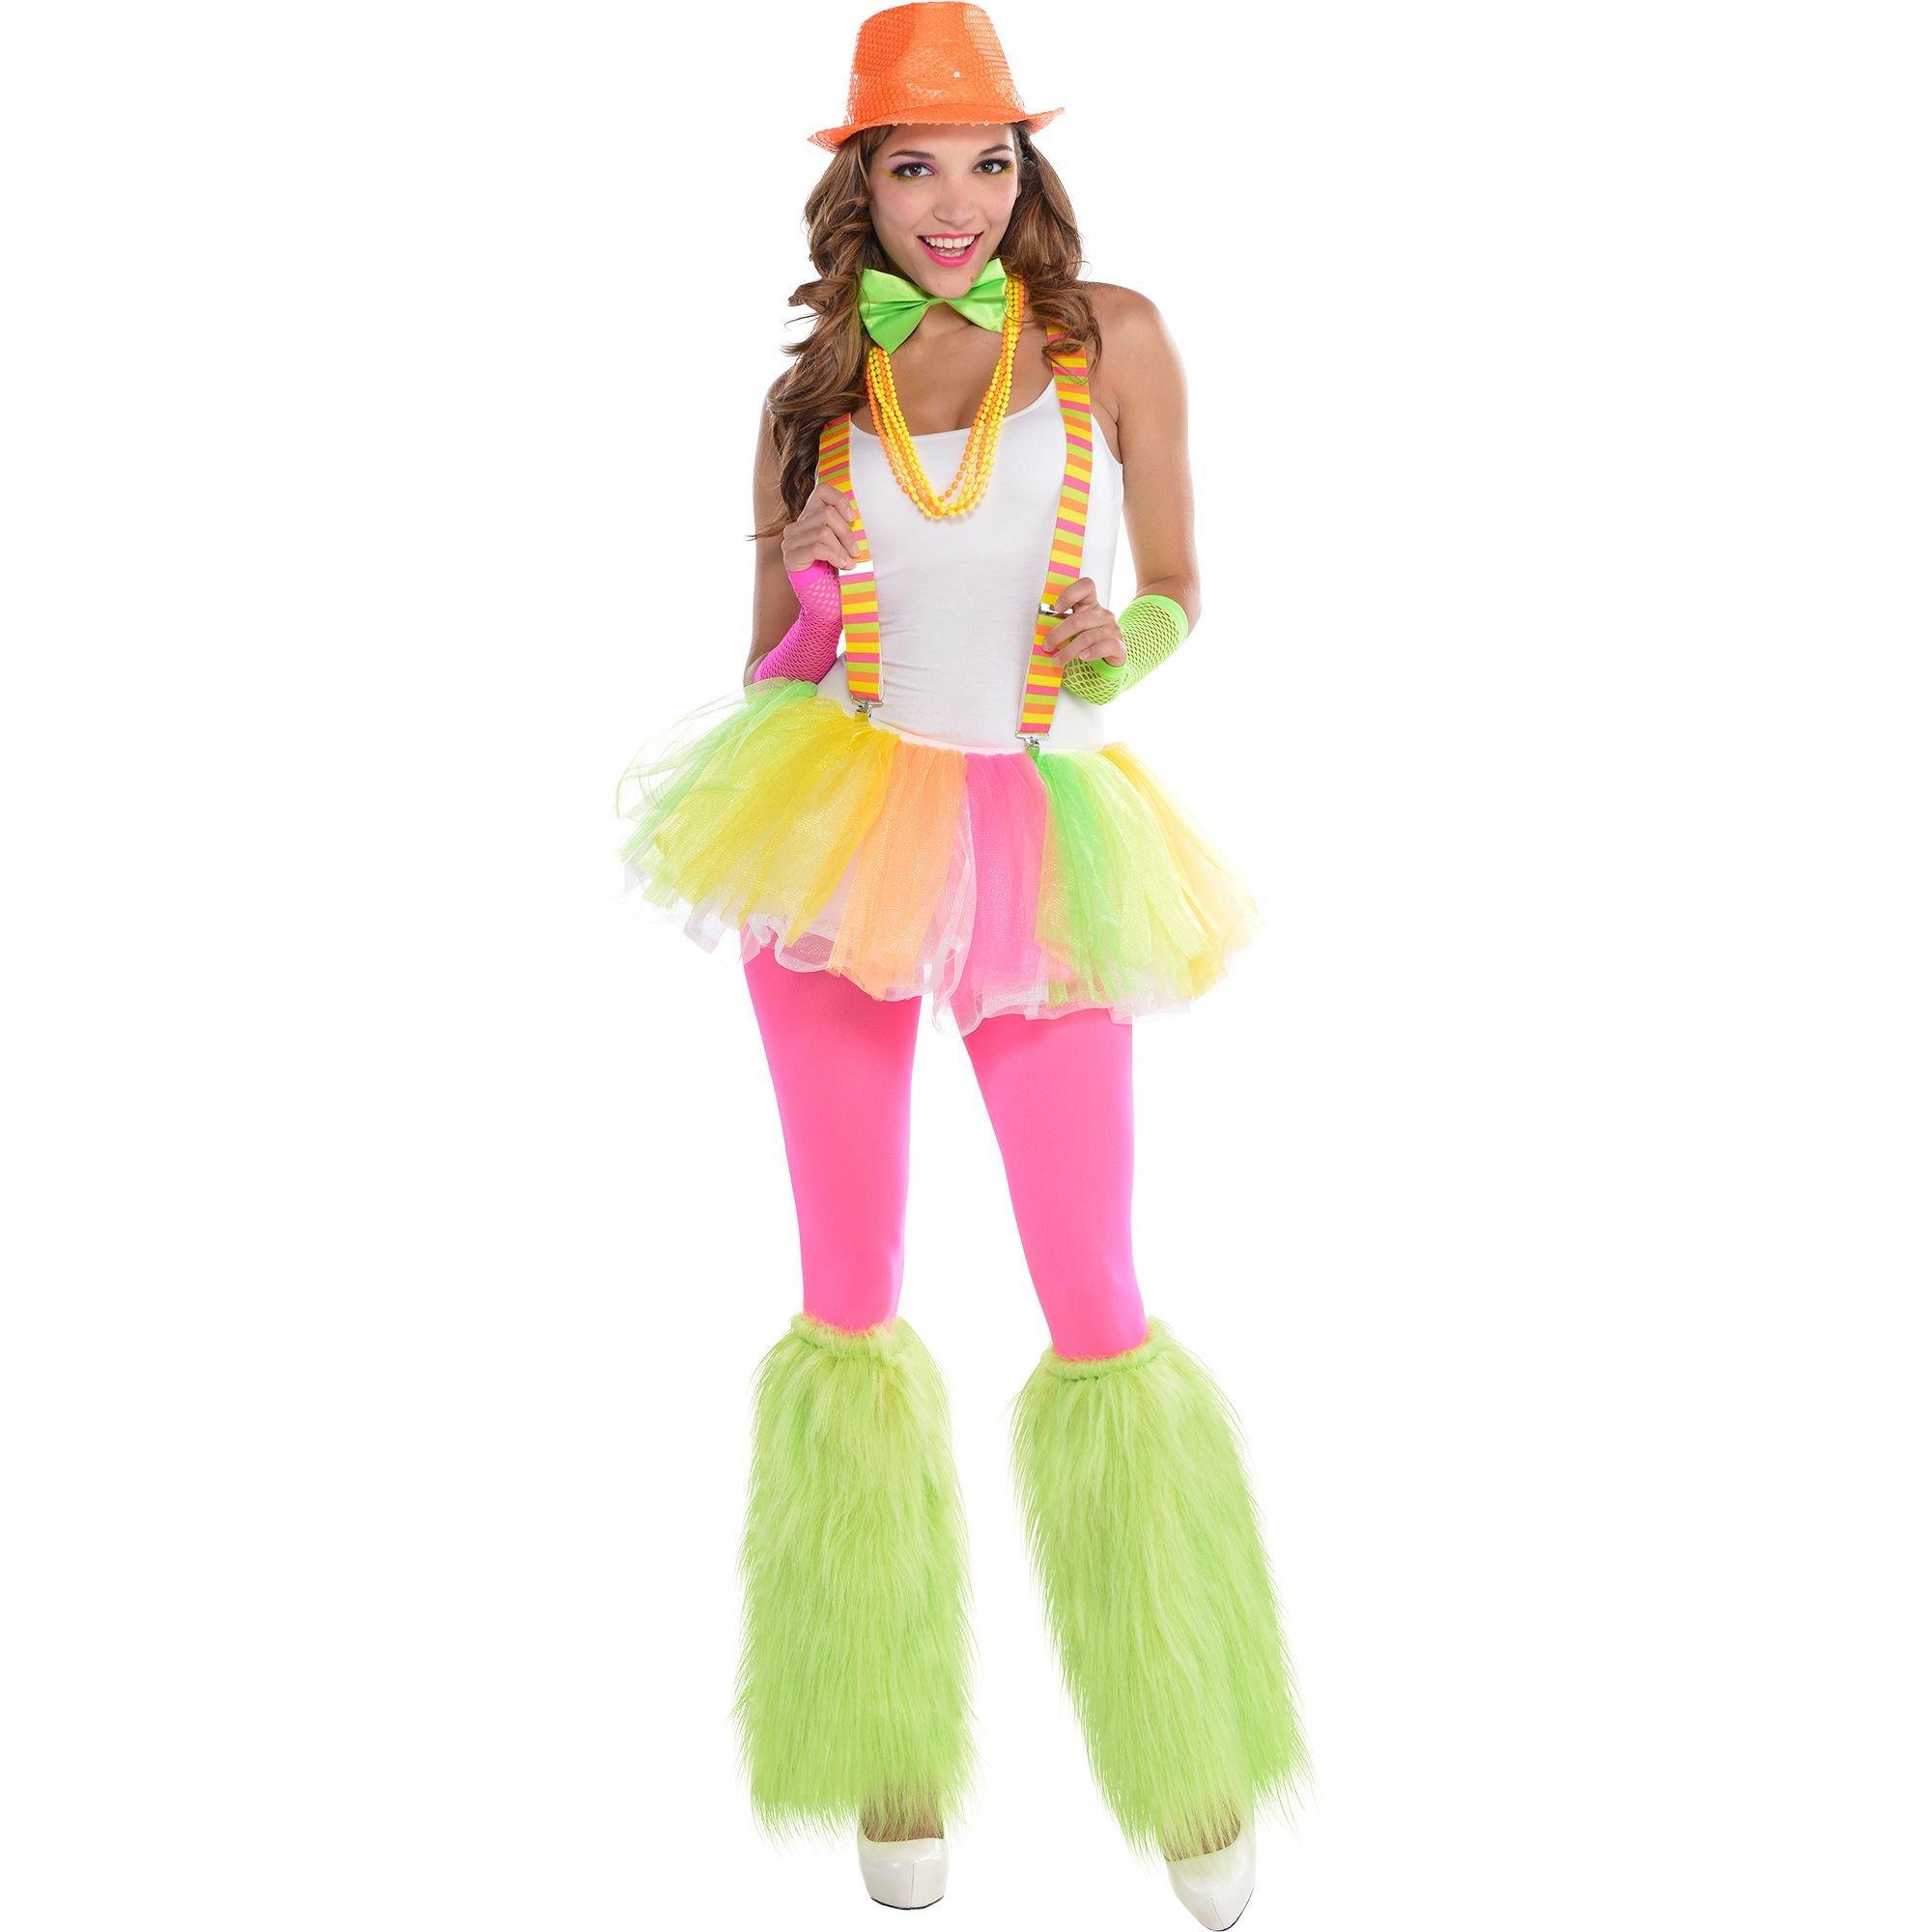 neon outfits for school